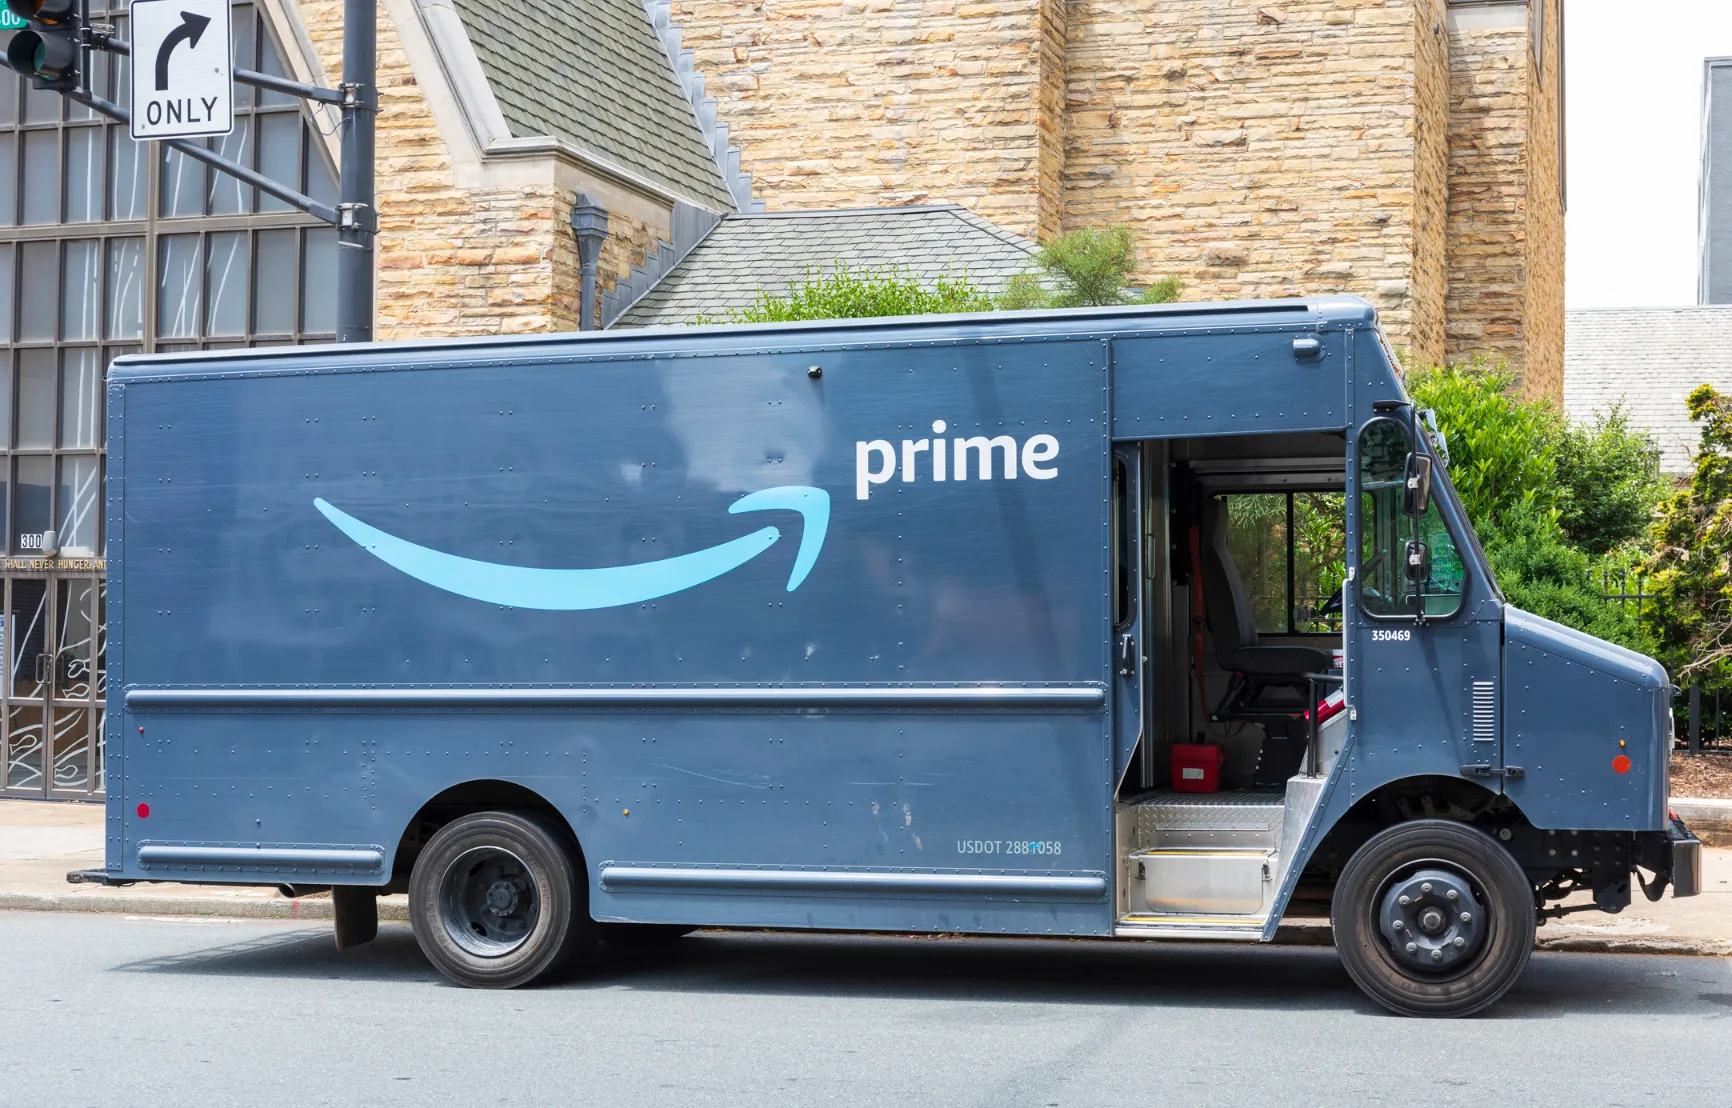 Amazon Prime truck parked on the street.